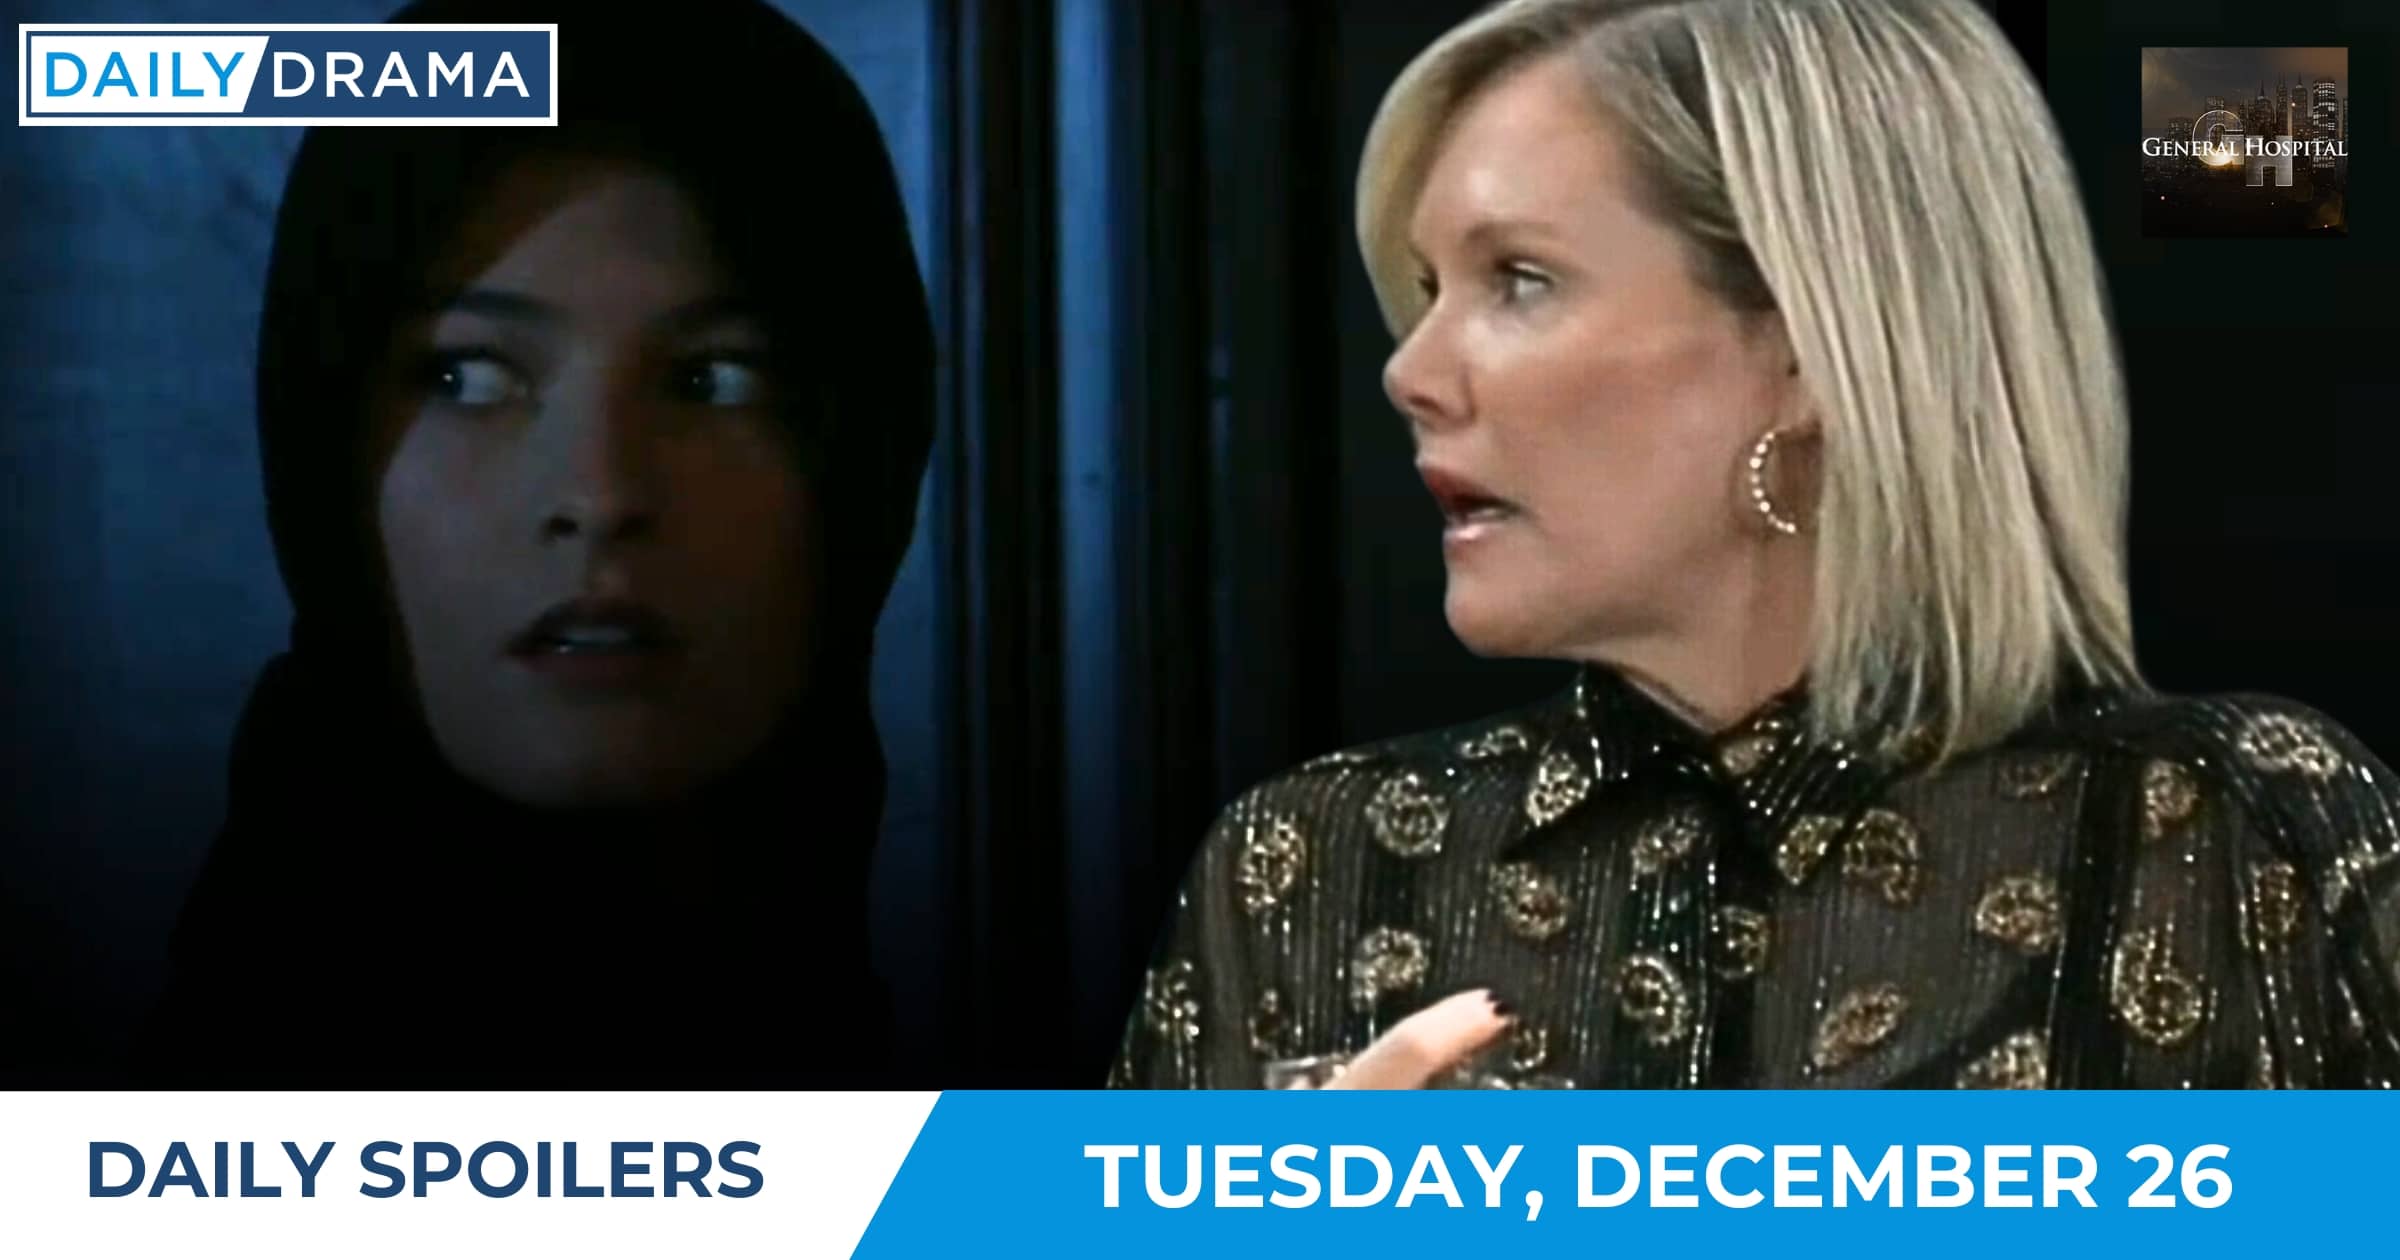 General Hospital Daily Spoilers - Dec 22 - Esme and Ava